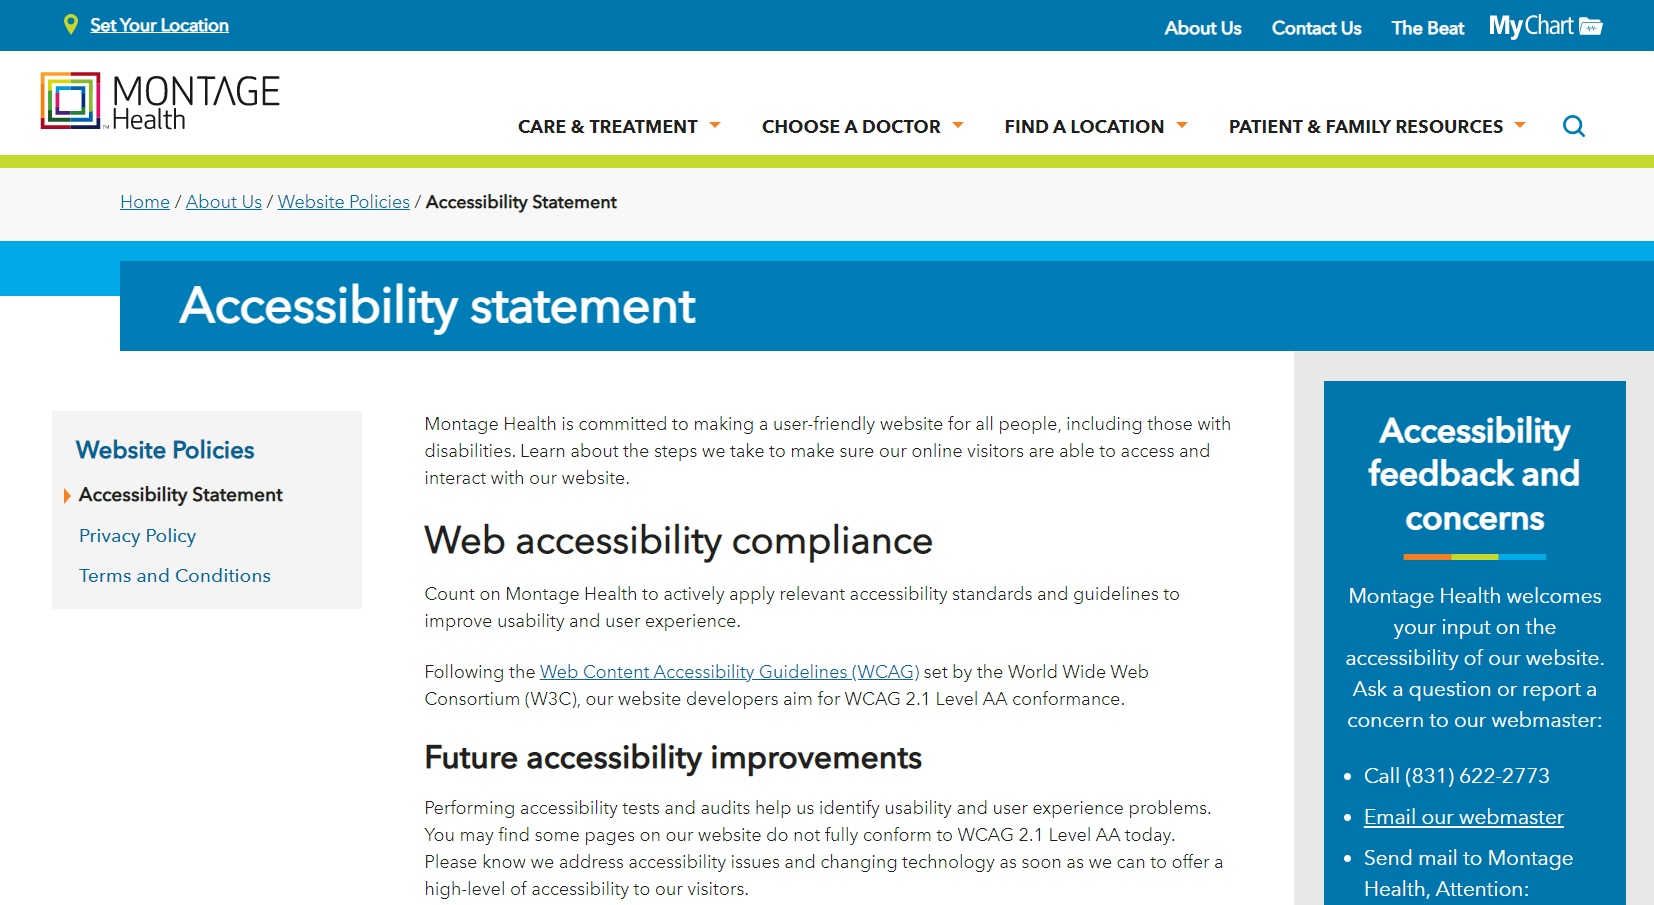 Image of Montage Health’s accessibility statement